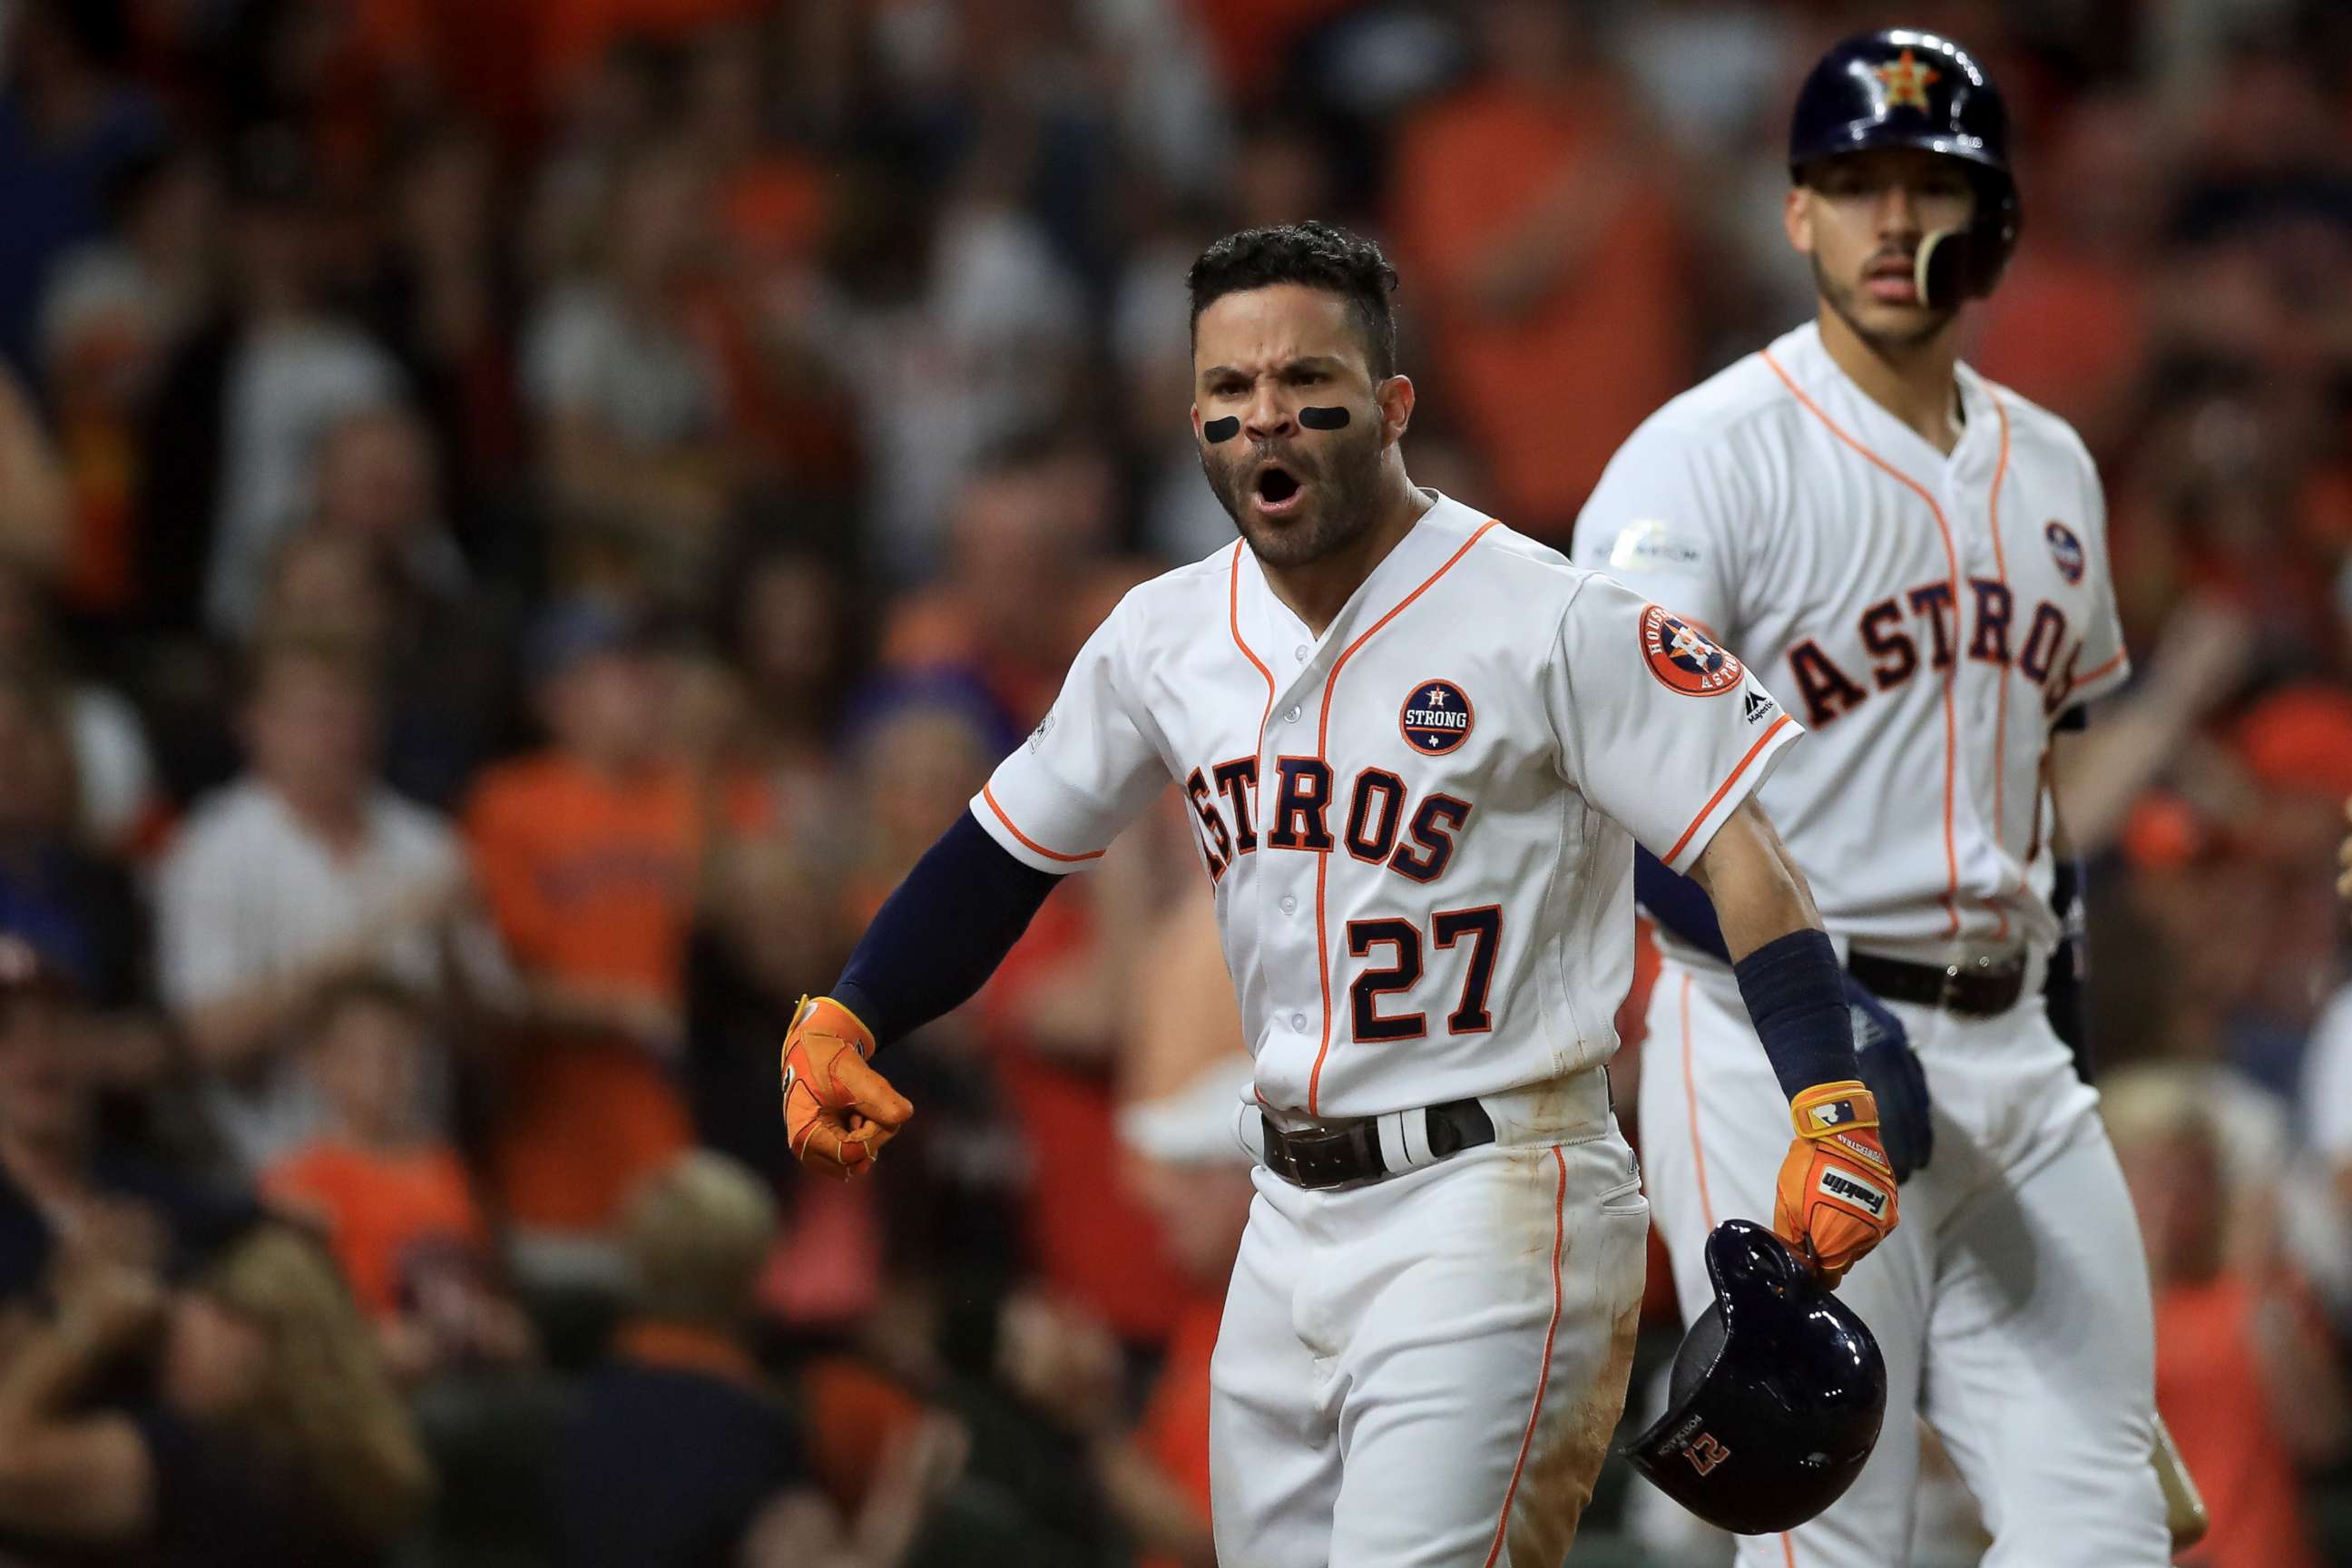 PHOTO: Jose Altuve of the Houston Astros celebrates after hitting a solo home run against the New York Yankees during at Minute Maid Park on Oct. 21, 2017 in Houston.